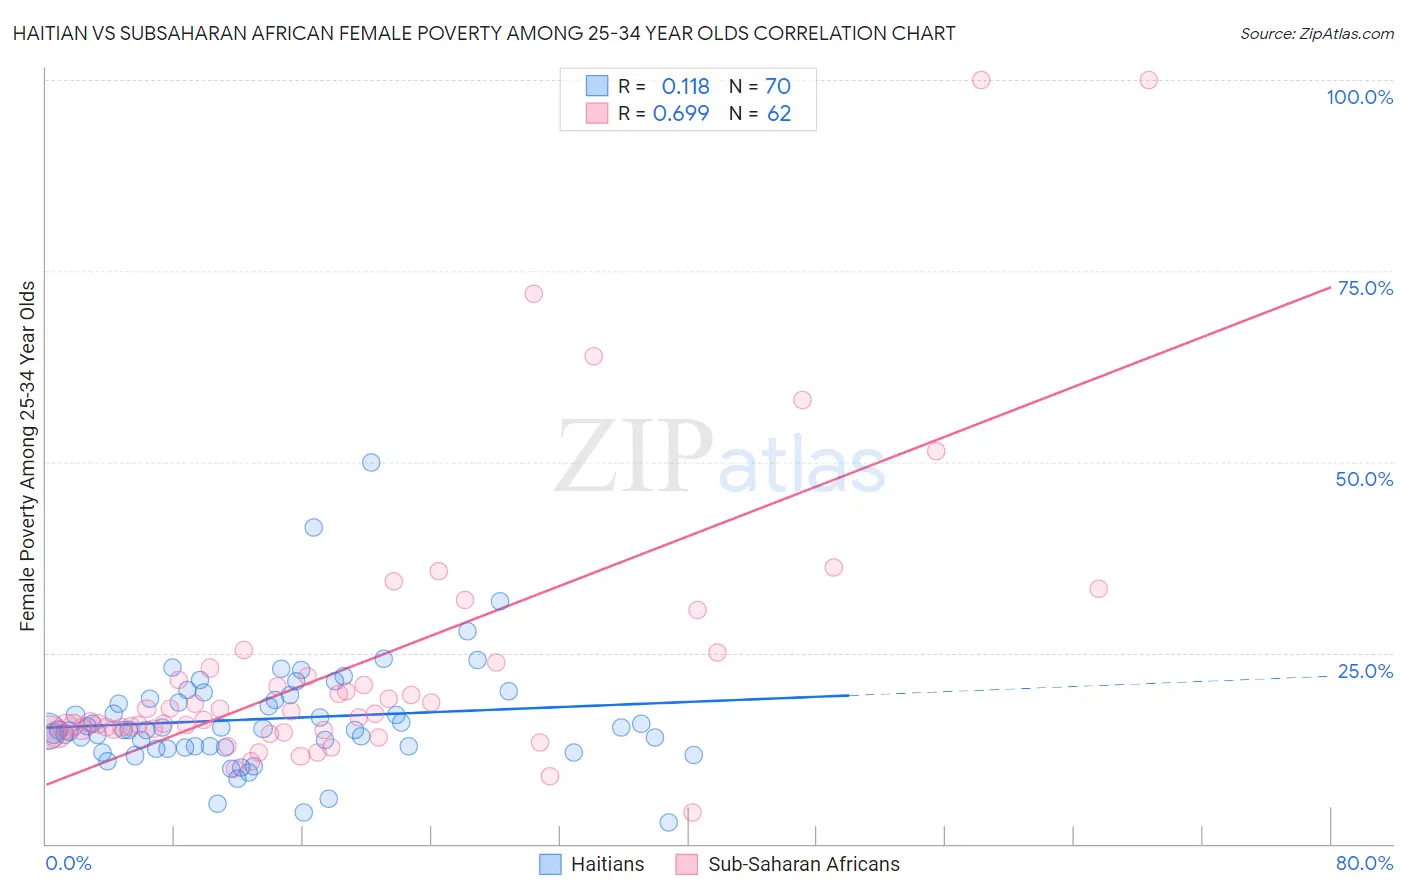 Haitian vs Subsaharan African Female Poverty Among 25-34 Year Olds